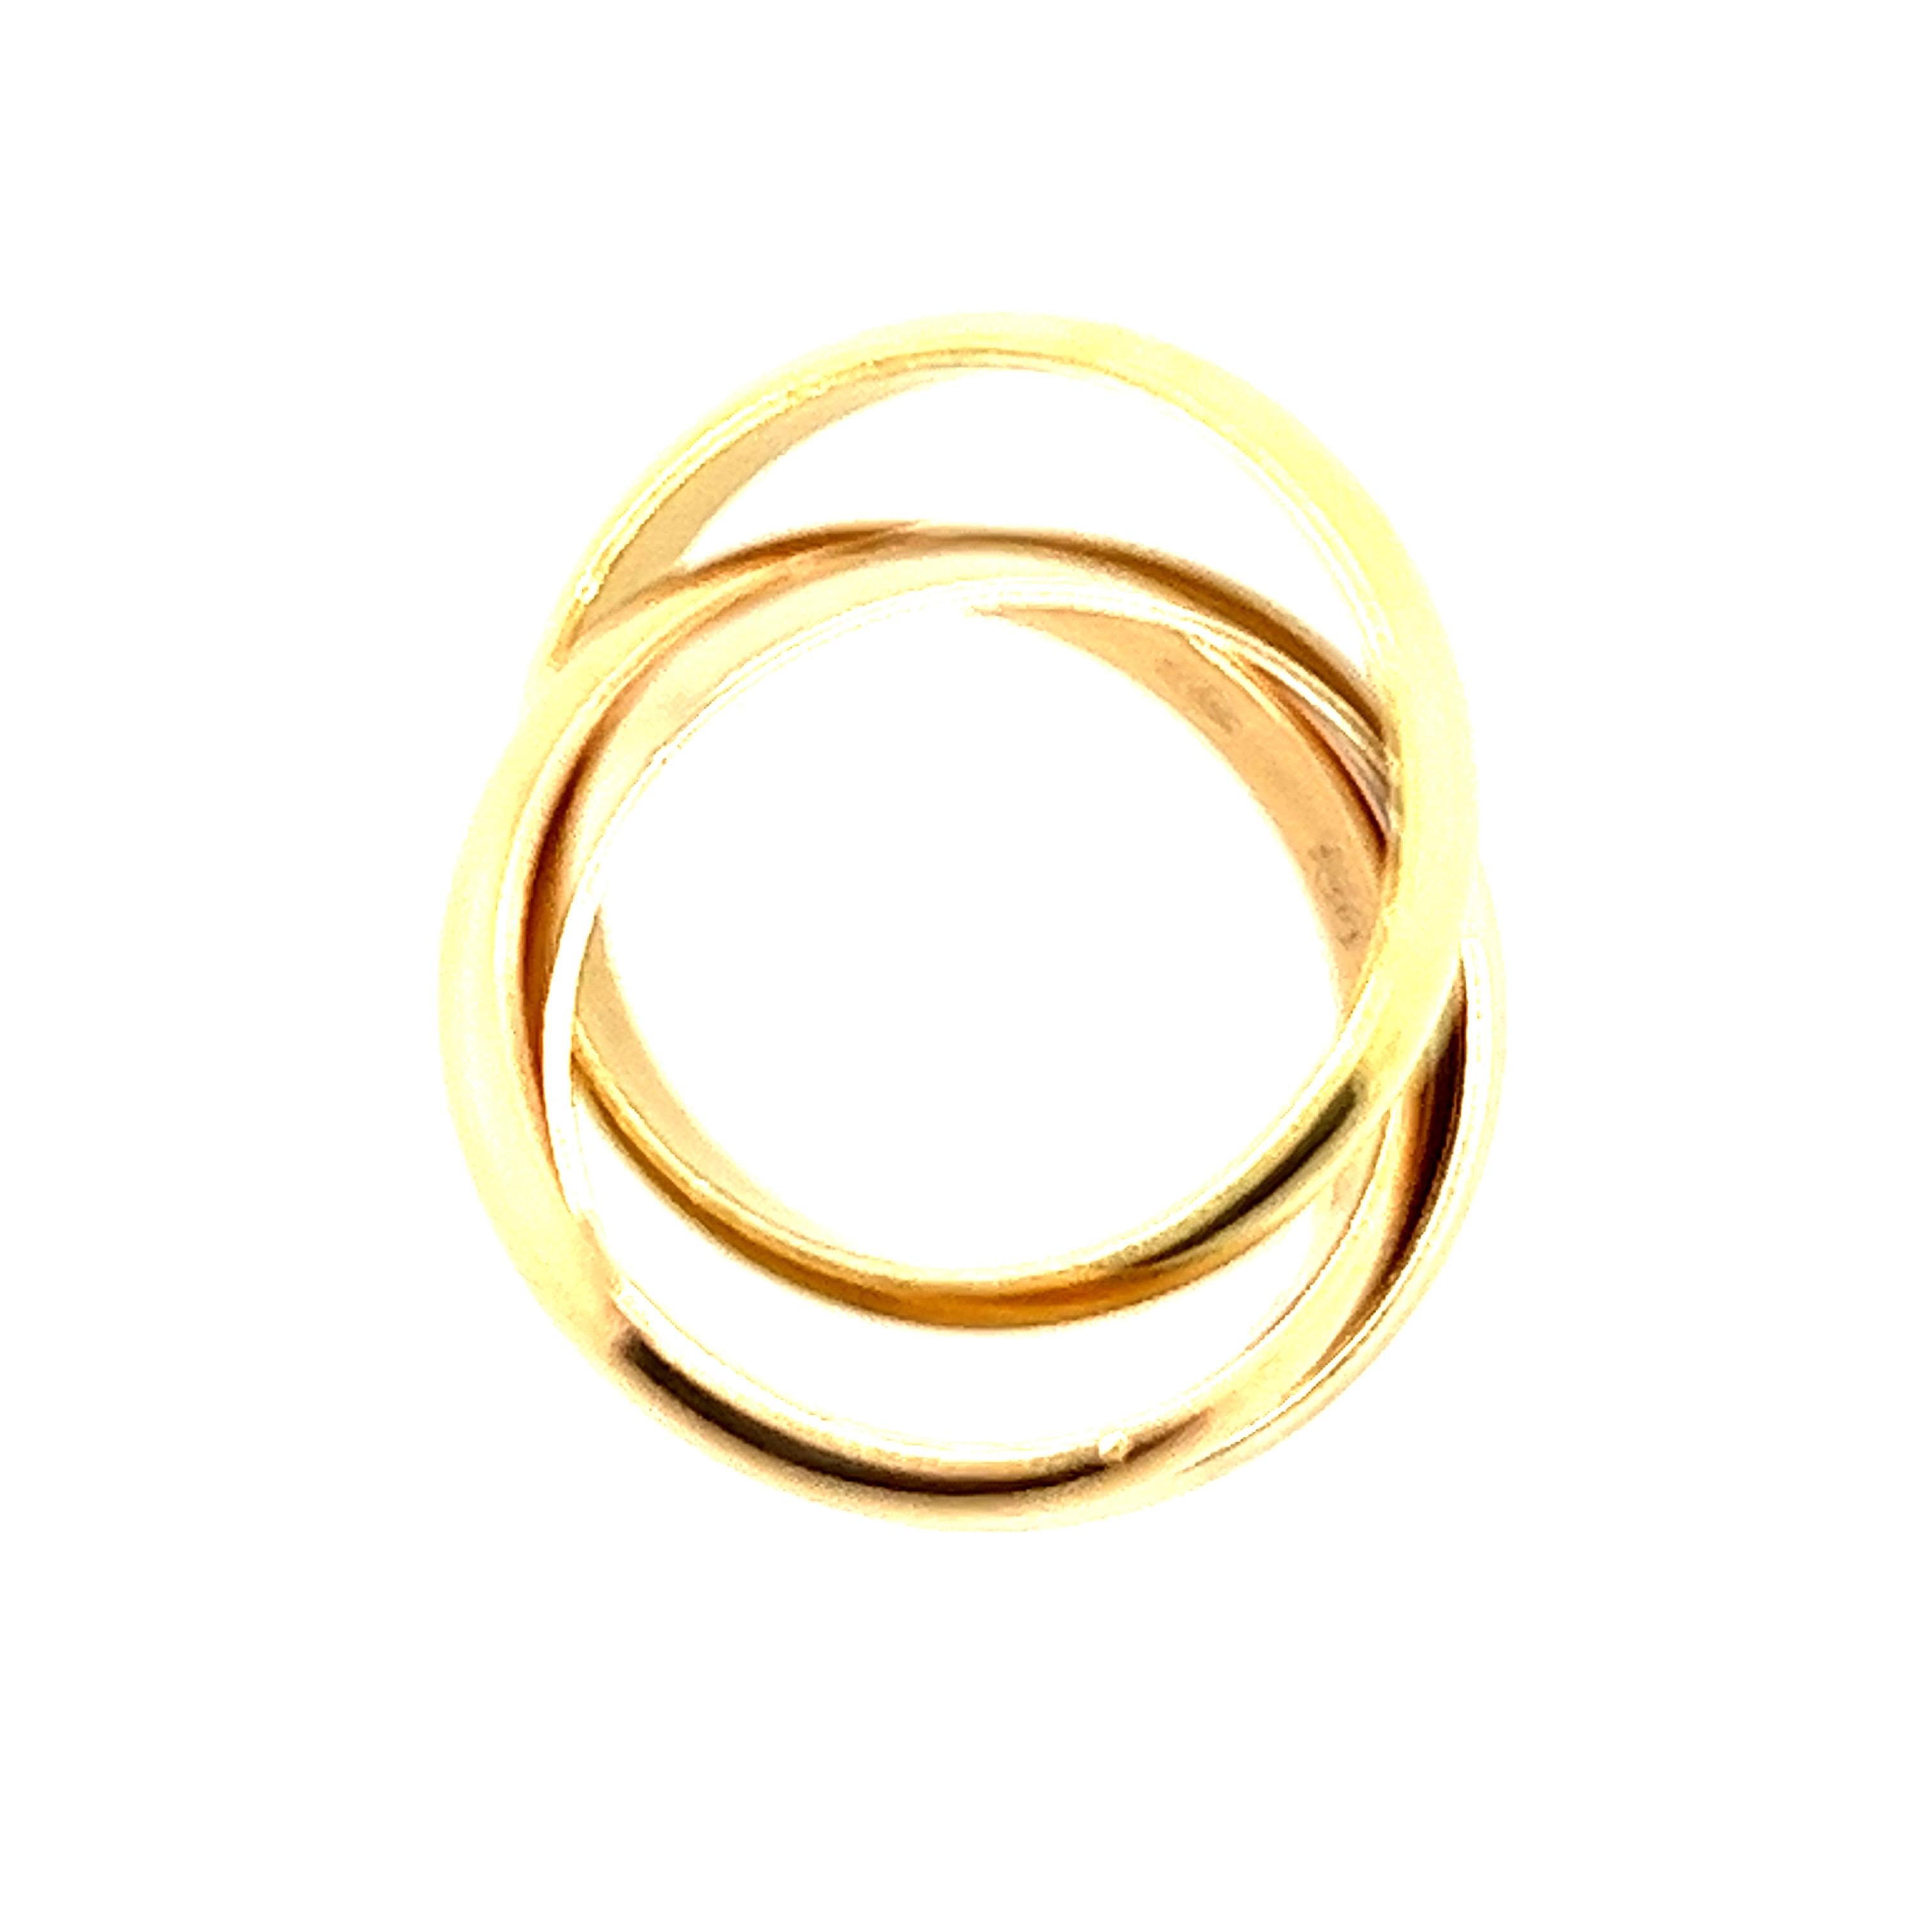 This beautiful trip colour Gold ring was designed by Louis Cartier himself in 1924. It remains a classic design and integral piece of the Cartier jewellery collection. This ring is crafted in 18k yellow, white & rose gold. These three together